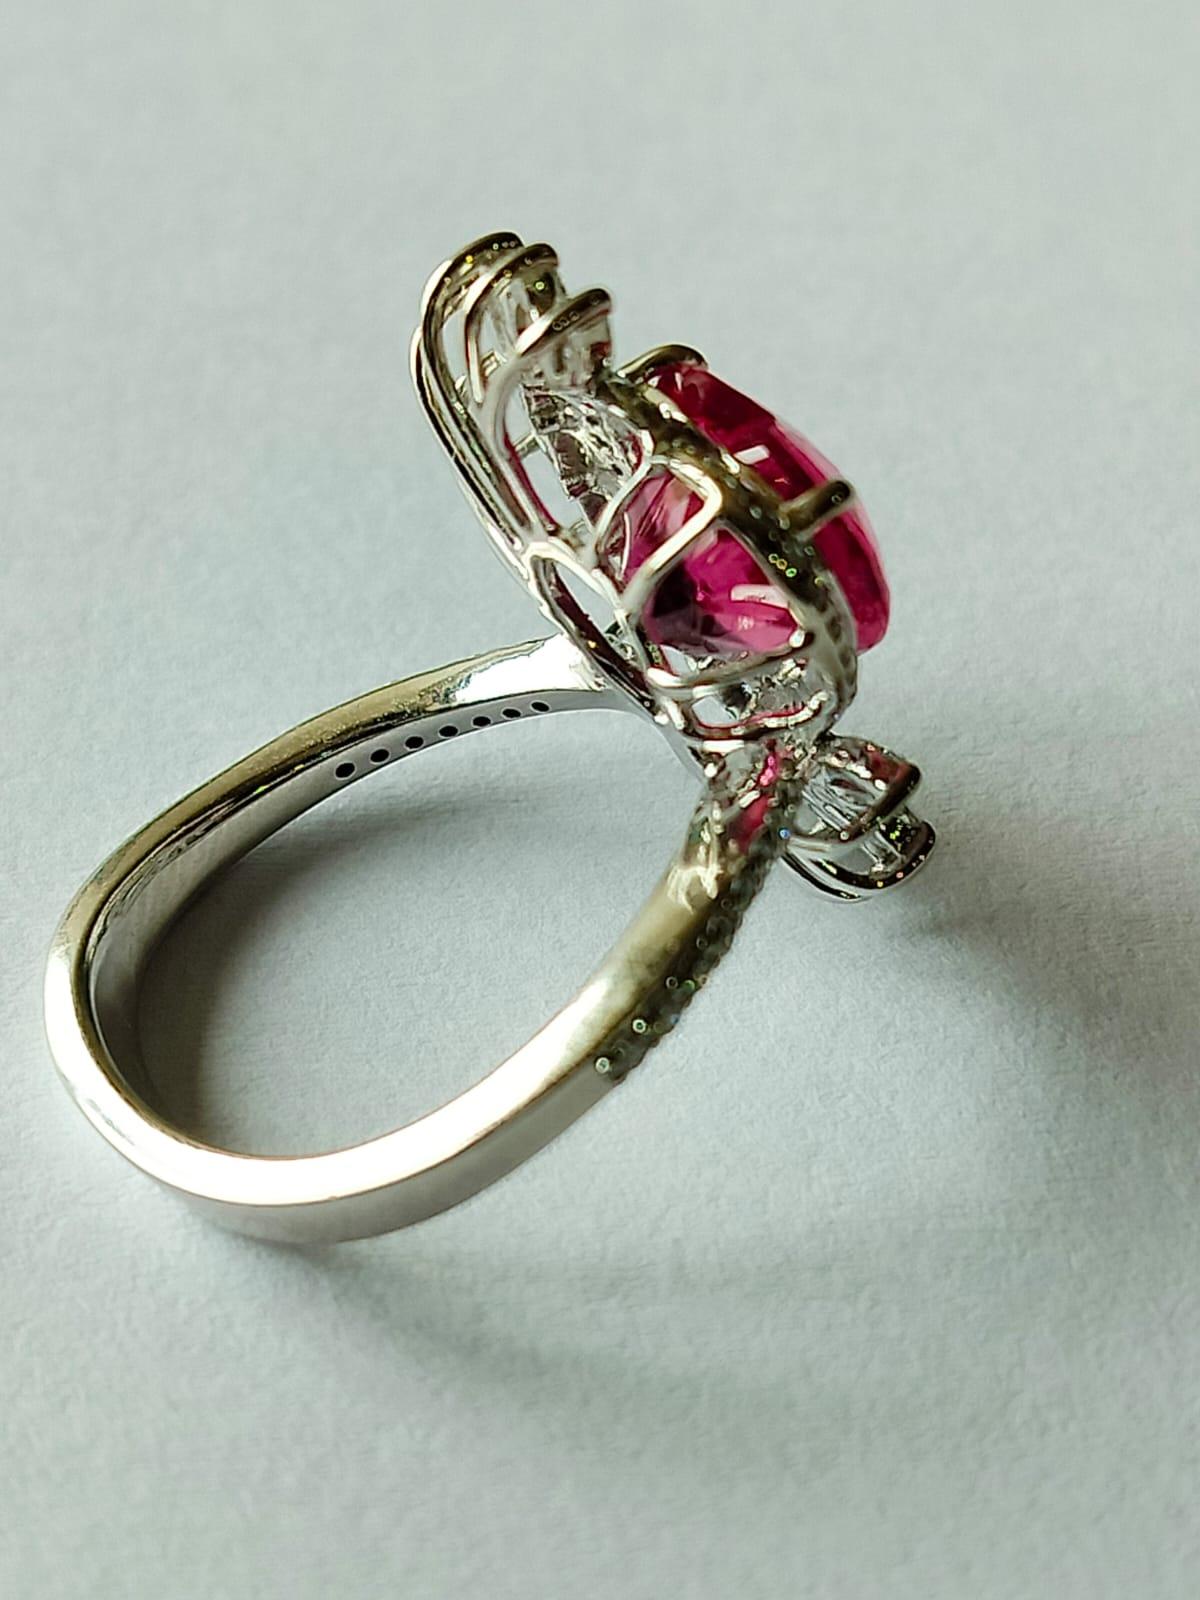 Set in 18K Gold, 3.51 Carats, Rubellite & Diamonds Engagement /Cocktail Ring For Sale 1